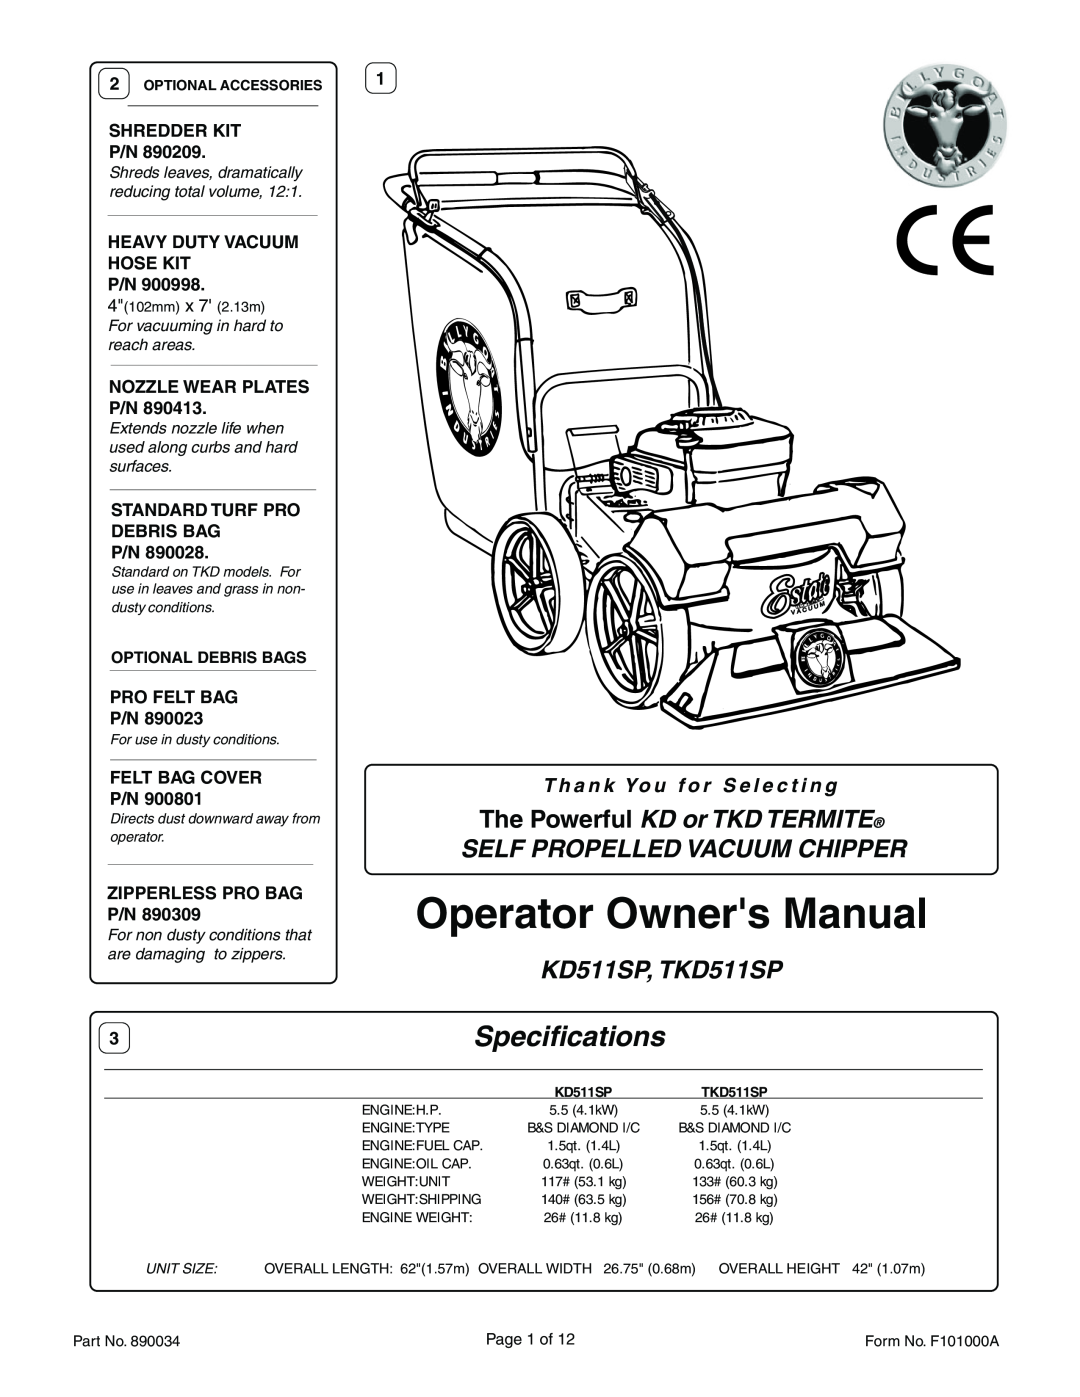 Billy Goat KD511SP, TKD511SP specifications The Powerful KD or TKD TERMITE SELF PROPELLED VACUUM CHIPPER, Specifications 